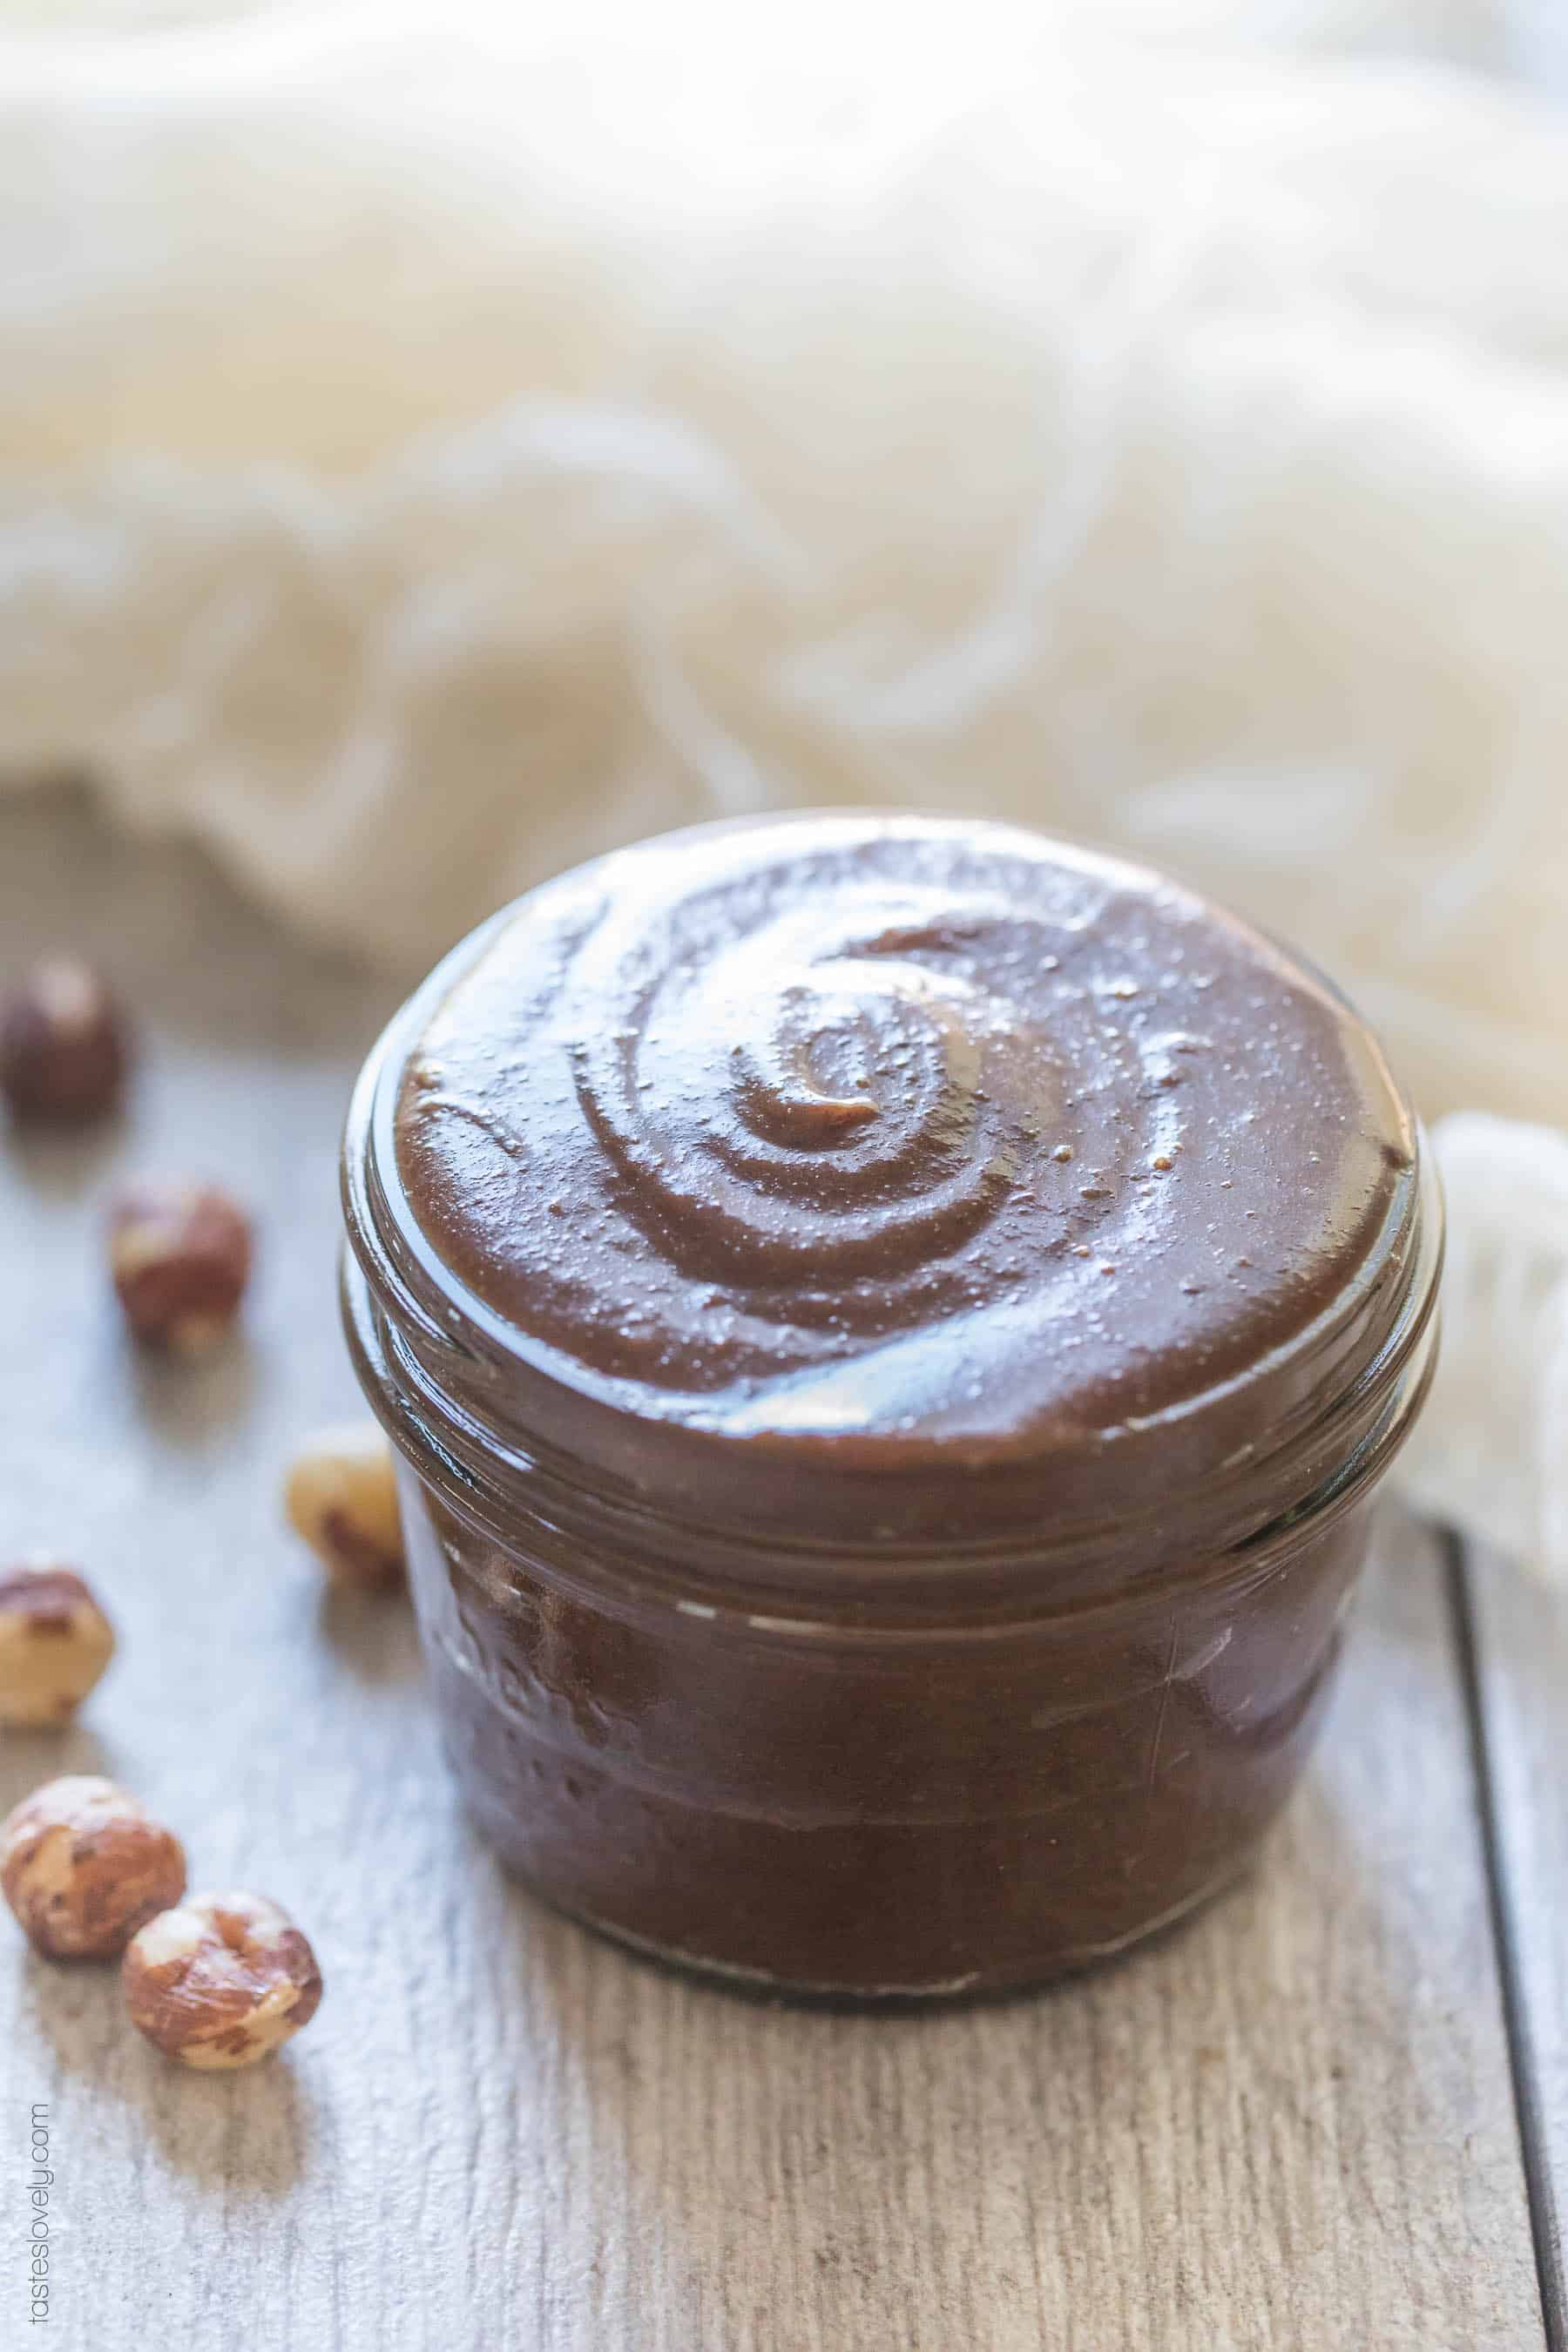 Homemade Paleo Nutella - made with just hazelnuts, cocoa powder and coconut sugar! A much healthier Nutella copycat hazelnut spread that is paleo, dairy free, refined sugar free, gluten free, grain free and clean eating.